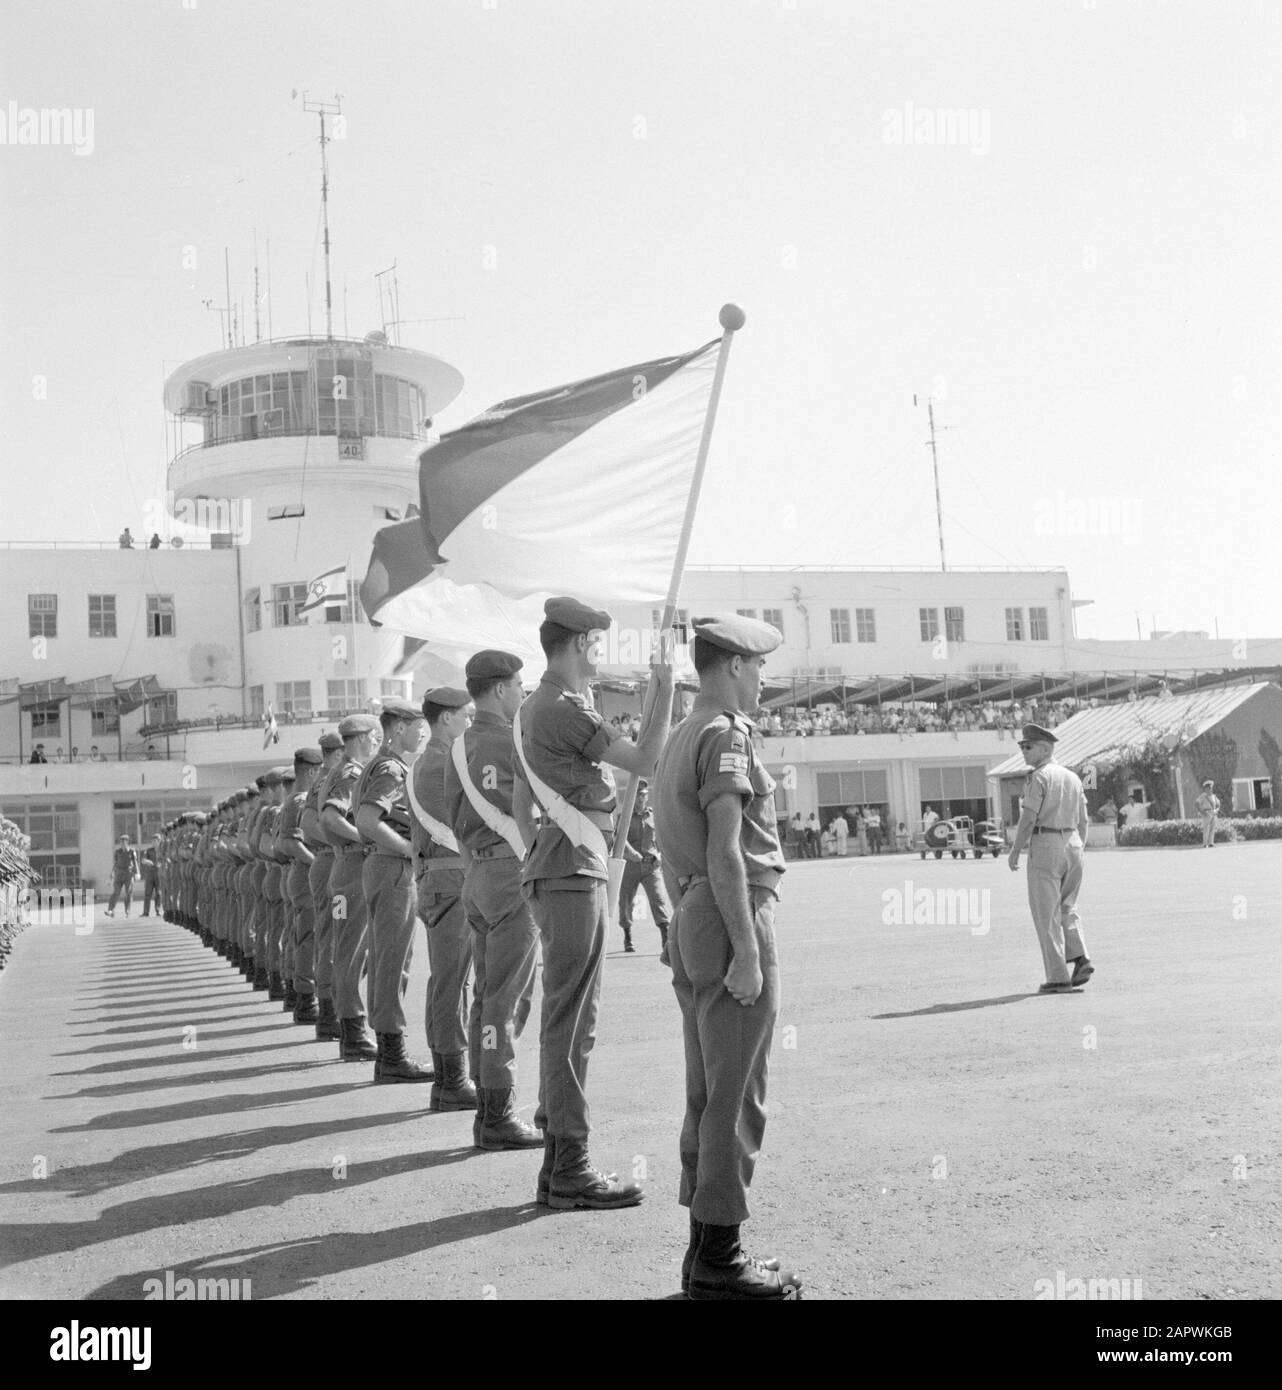 Israel: Lydda Airport (Lod)  Military honor hedge at the foot of the control tower Date: undated Location: Israel, Lod Airport, Lydda Airport Keywords: aviation, military, control towers, flags, airports Stock Photo